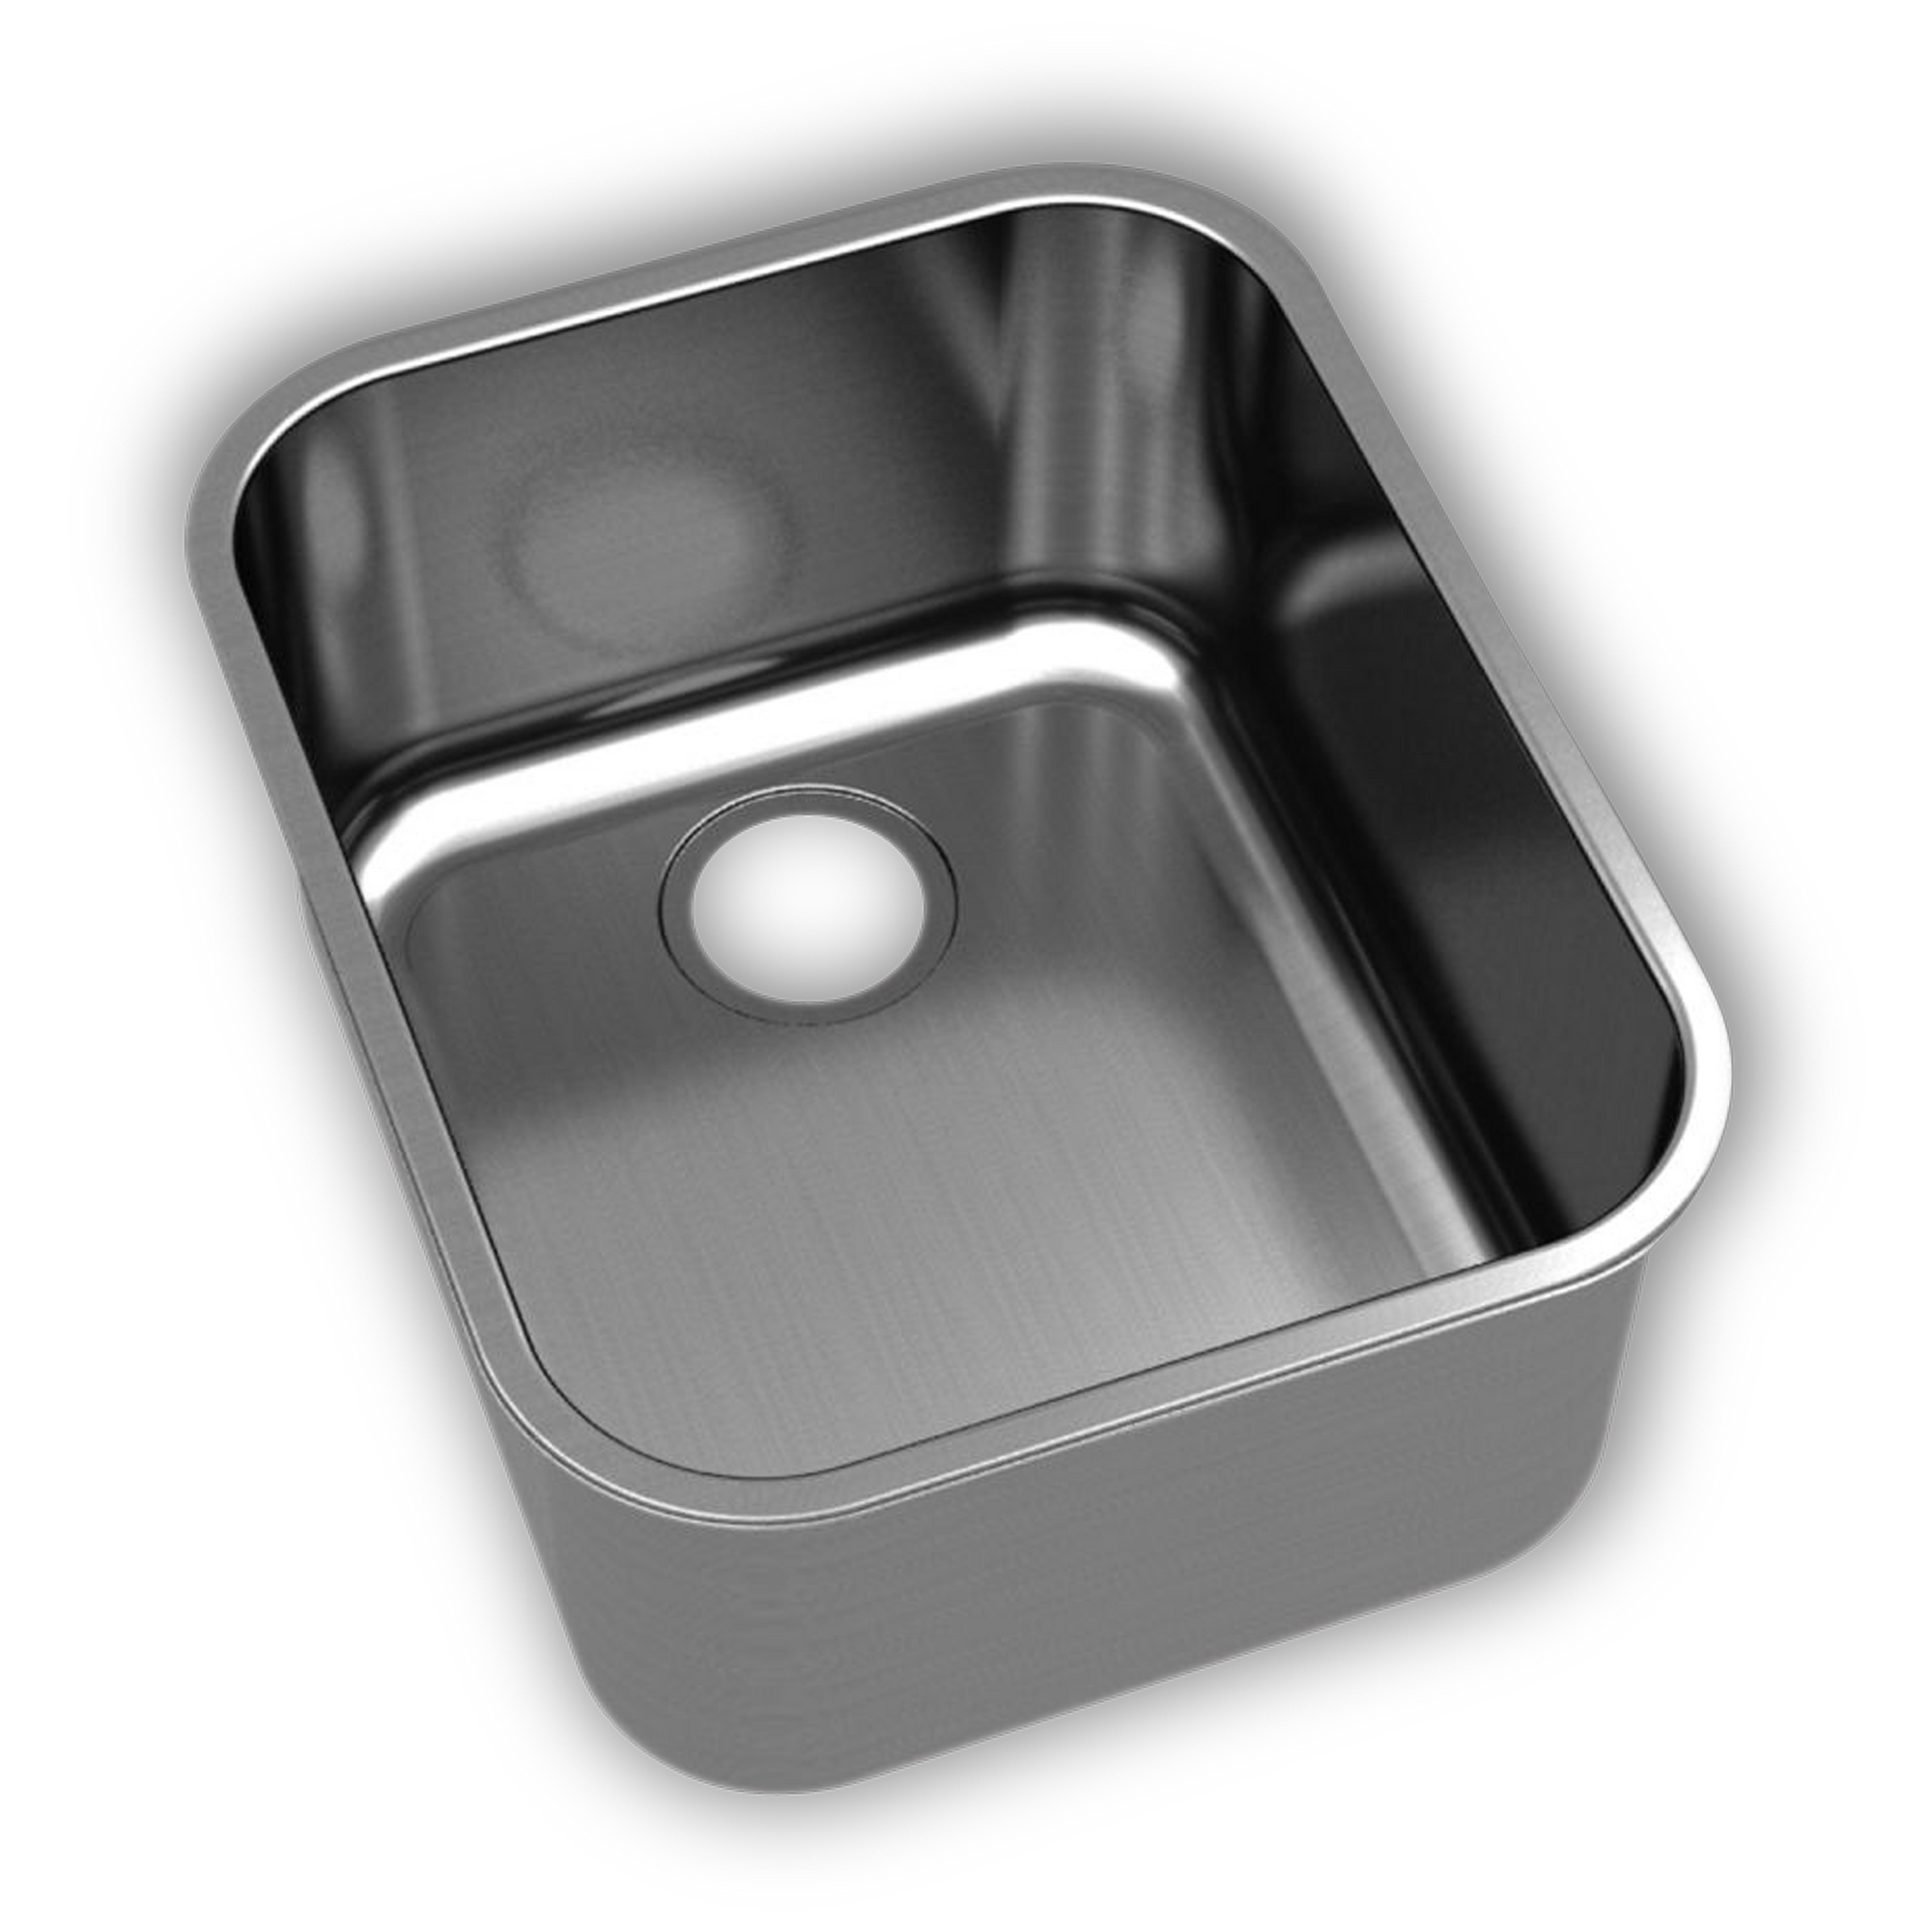 The kitchen sink is a home essential! Stainless steel kitchen sink, single bowl, with a centre-hole drain.